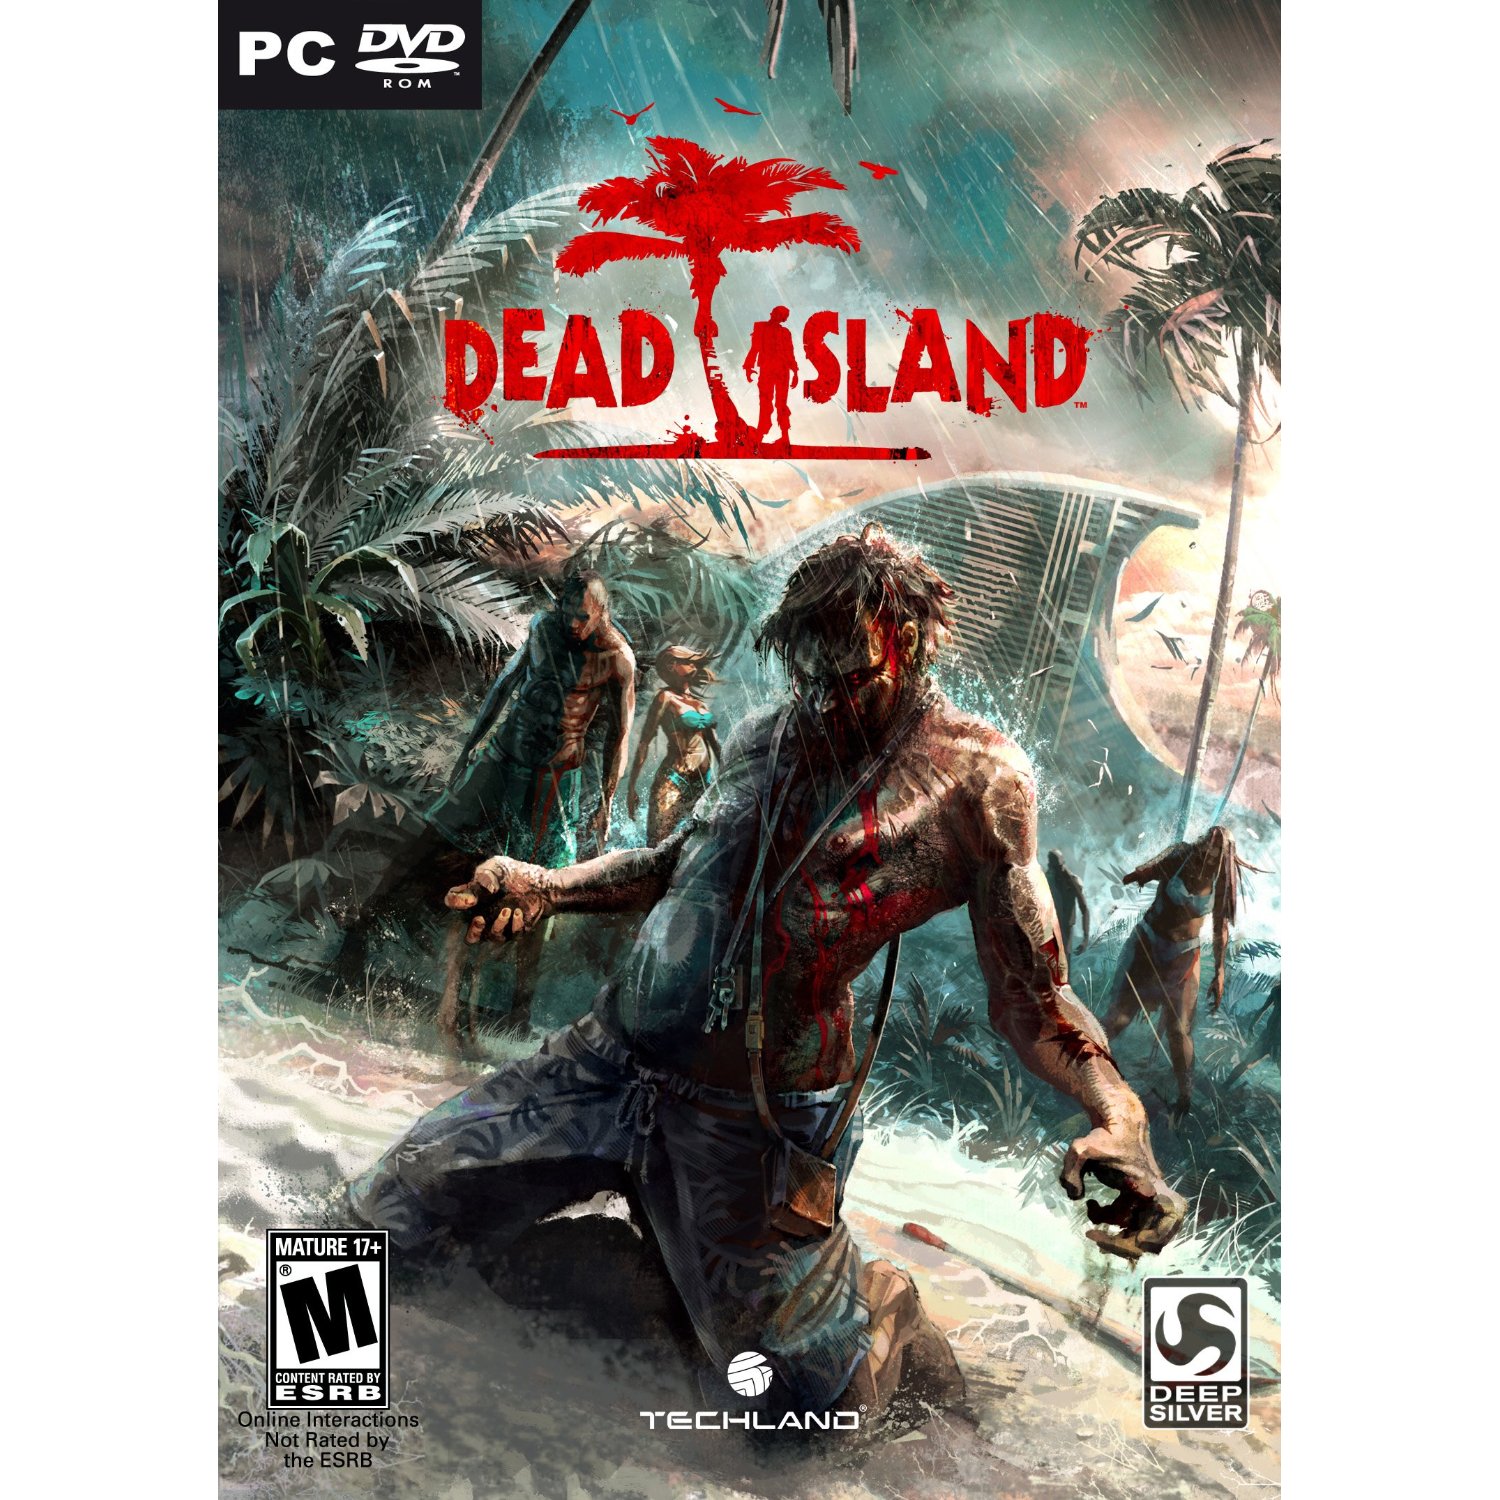 http://thetechjournal.com/wp-content/uploads/images/1108/1313819587-dead-island-game-review-1.jpg